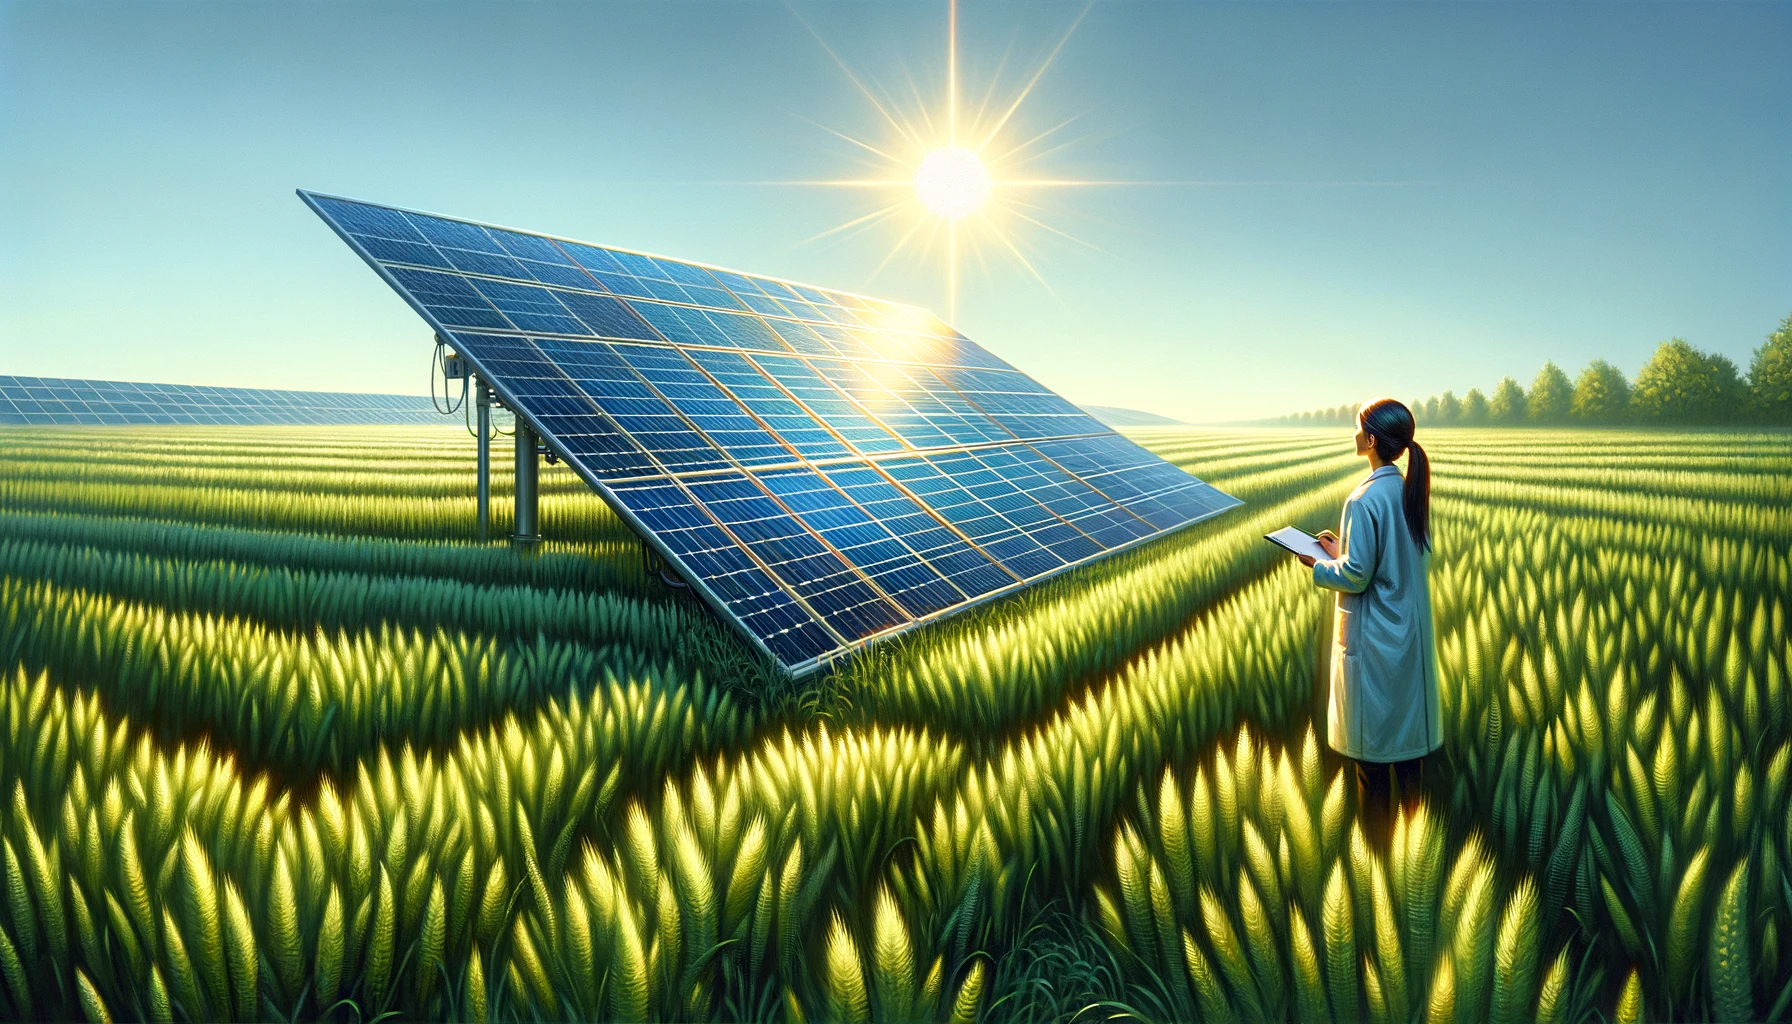 A scientist stands in a field trying to understand: What Are Solar Panels And How Do They Work